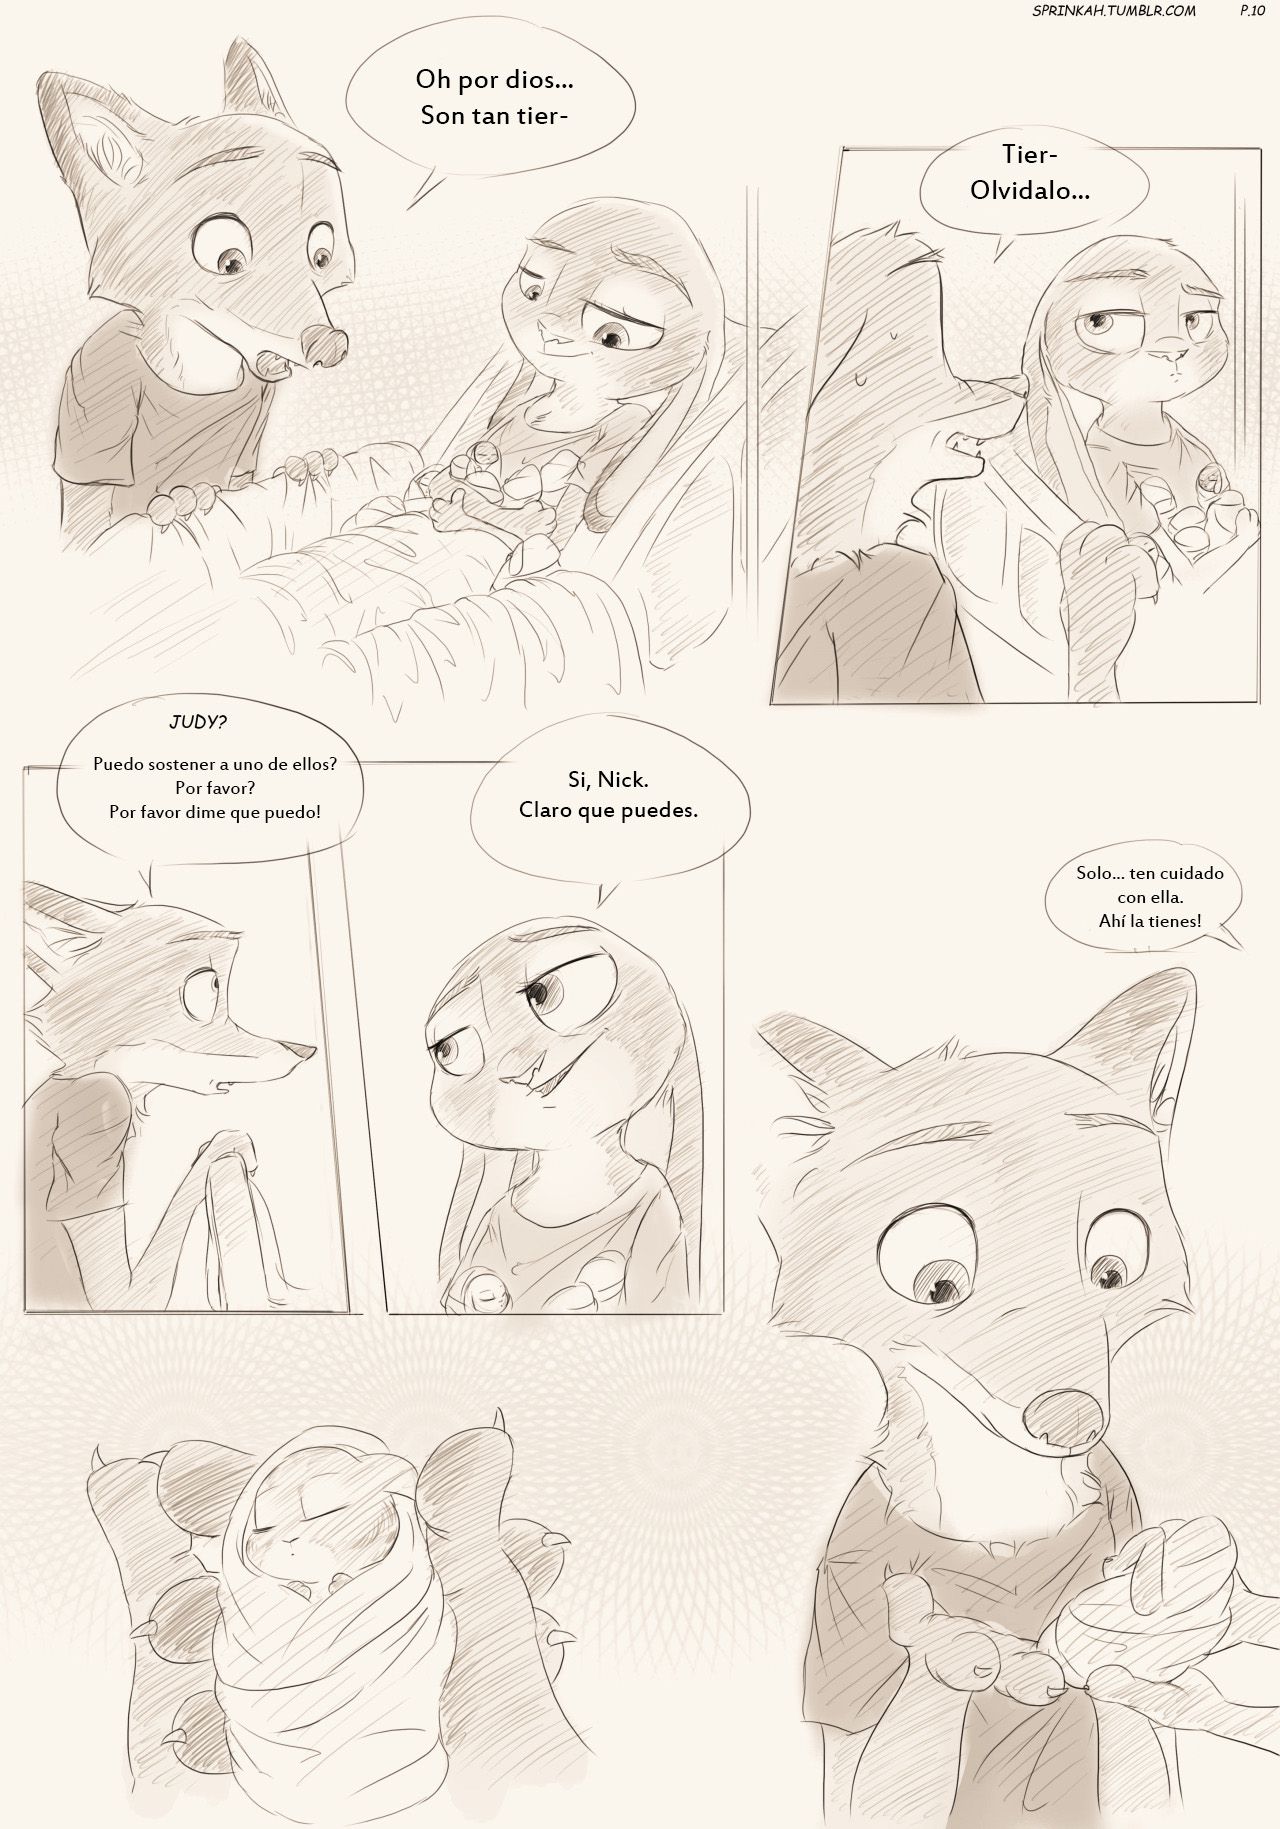 [Sprinkah] This is what true love looks like (Zootopia) (Spanish) (On Going) [Landsec] http://sprinkah.tumblr.com/ 16